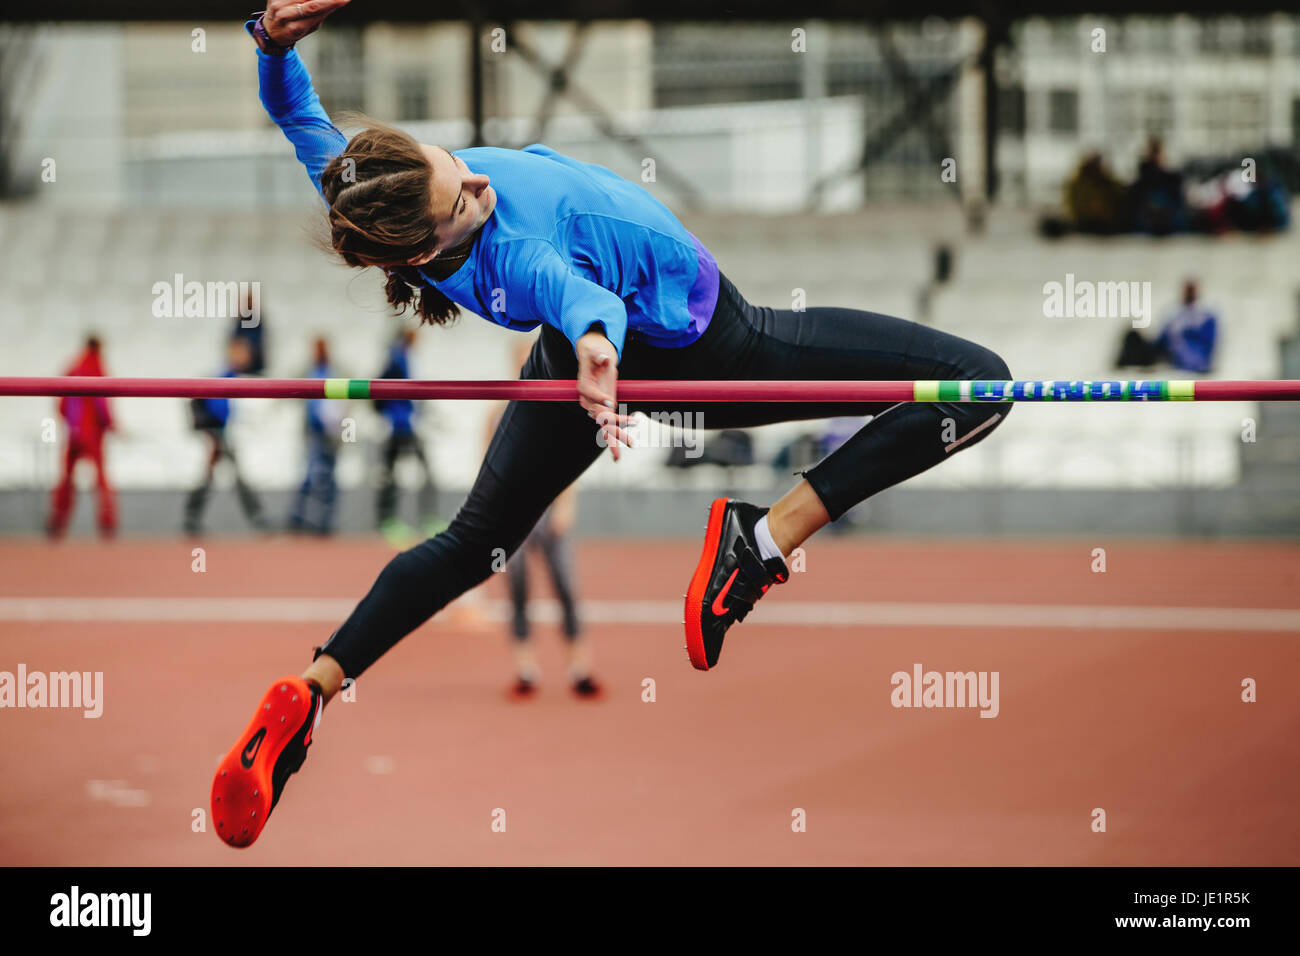 female athlete jumping successful attempt at high jump during UrFO Championship in athletics Stock Photo